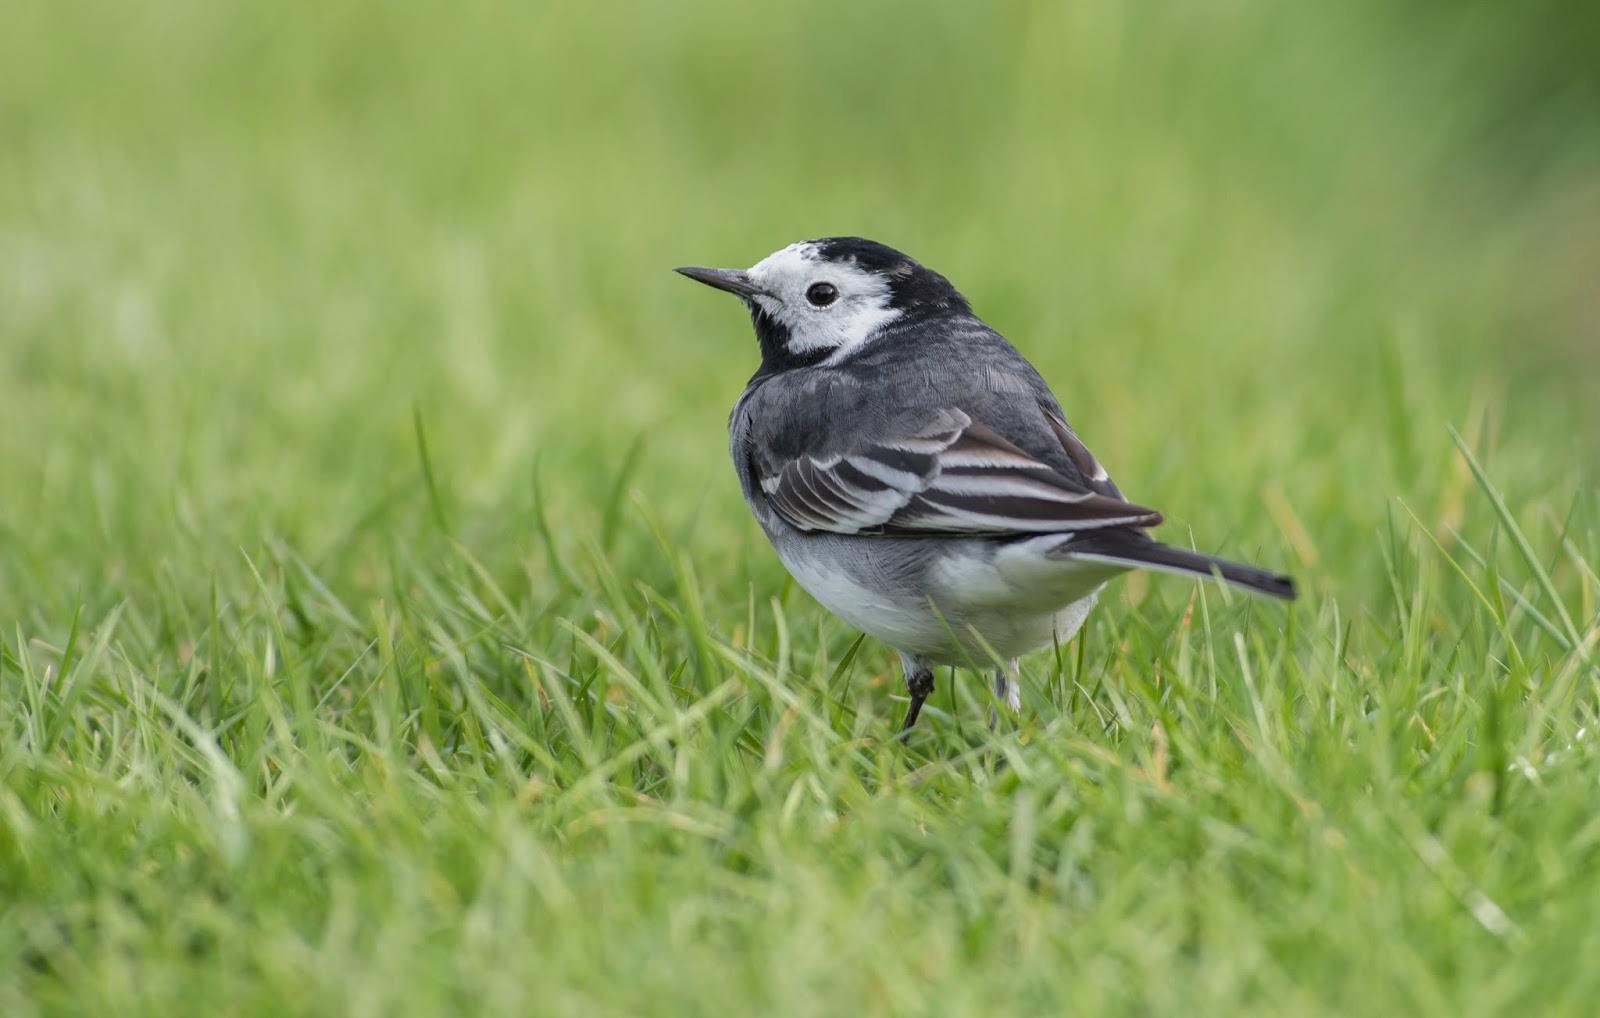 Bob's Butterfly and Bird Blog: Pied Wagtails.